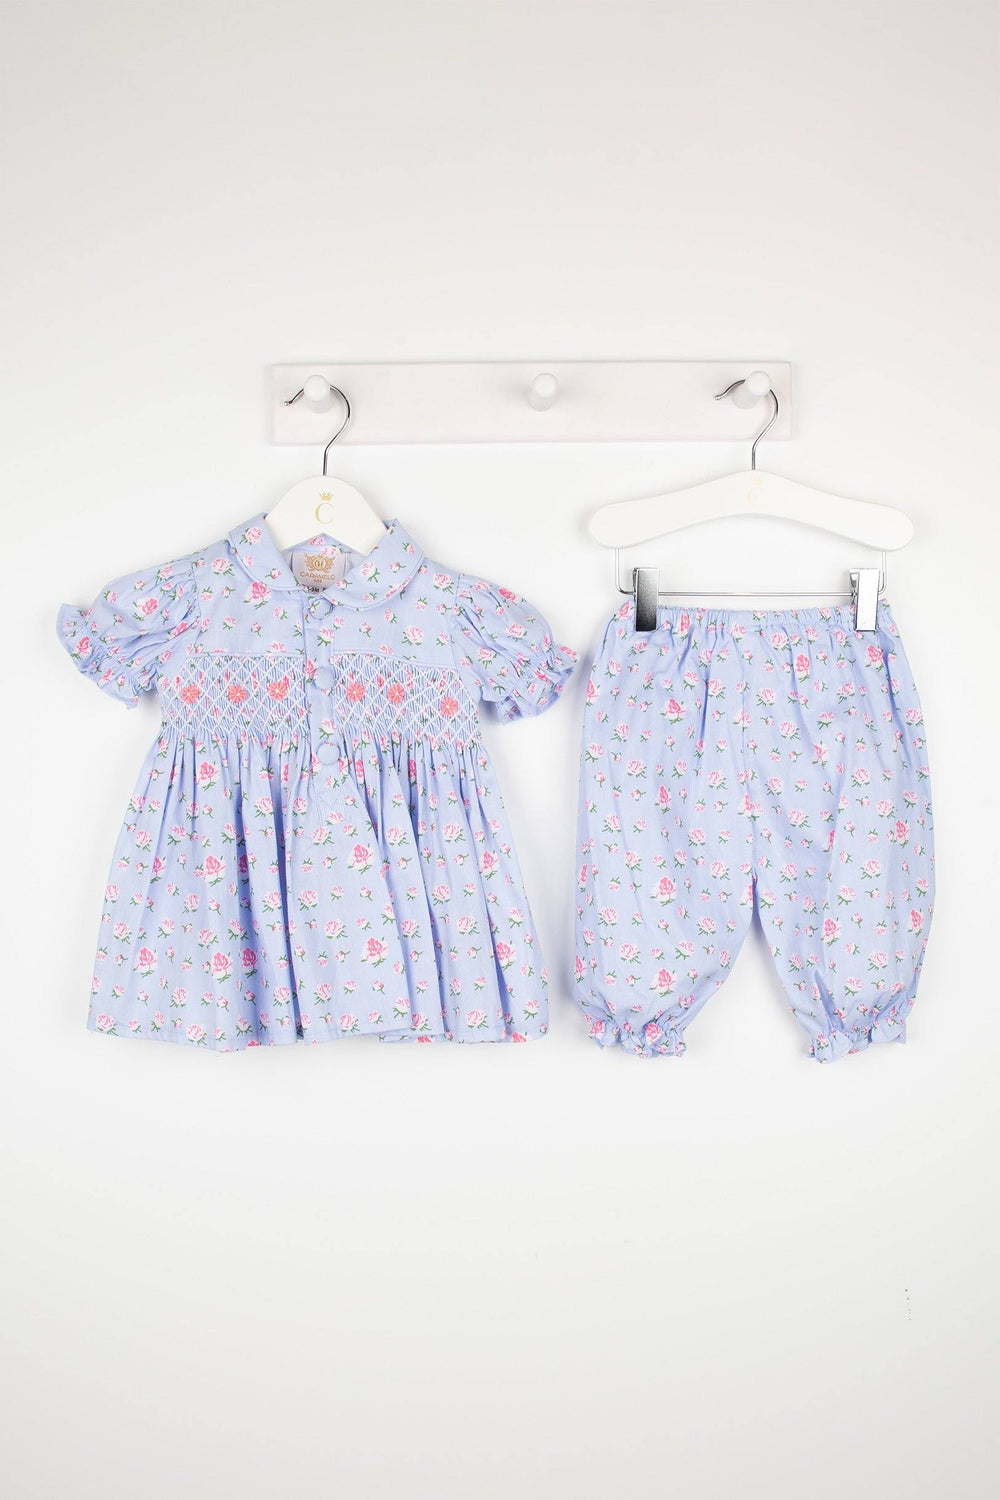 Caramelo Kids "Raeni" Blue Floral Smocked Blouse & Bloomers | Millie and John